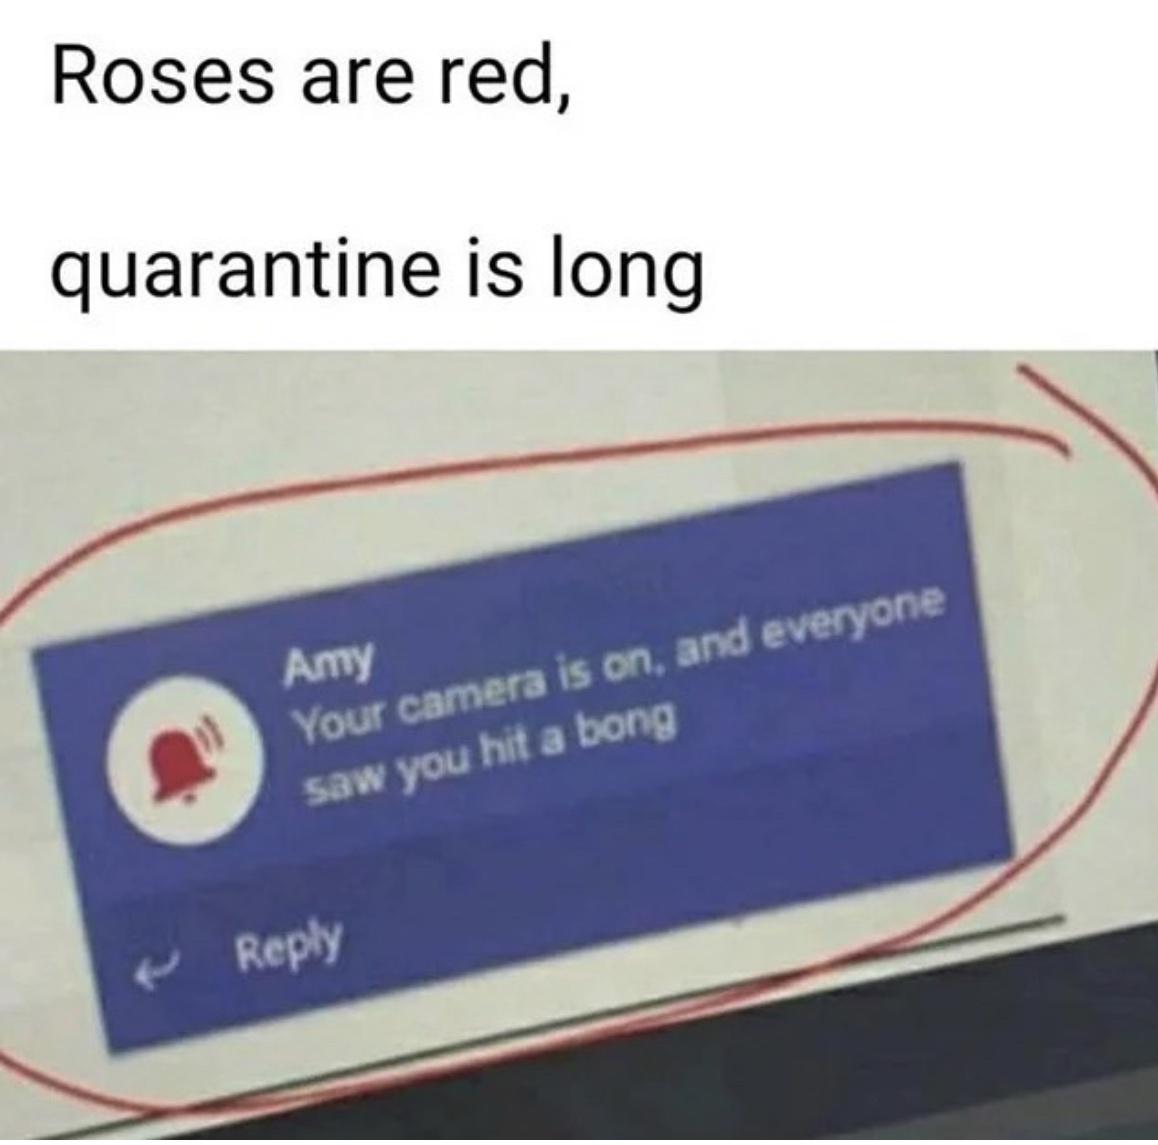 funny memes and random pics - number - Roses are red, quarantine is long Amy Your camera is on, and everyone saw you hit a bong Put